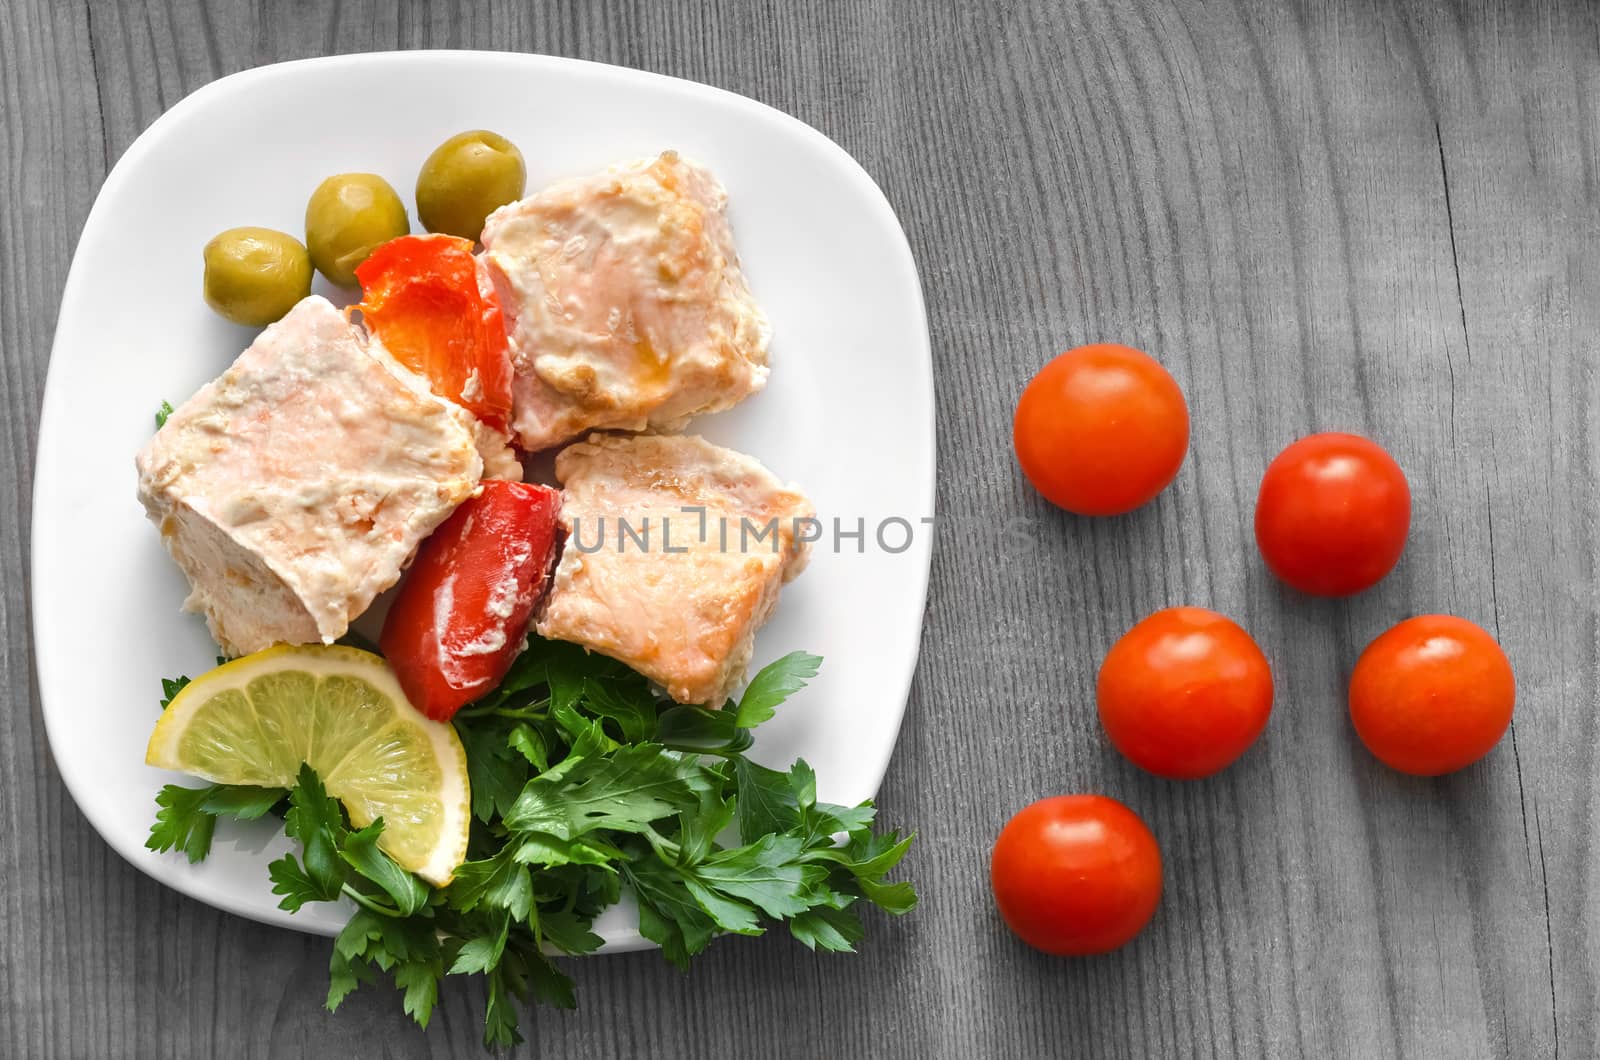 Salmon, grilled with lemon and vegetables. On a white plate and a gray wooden background.